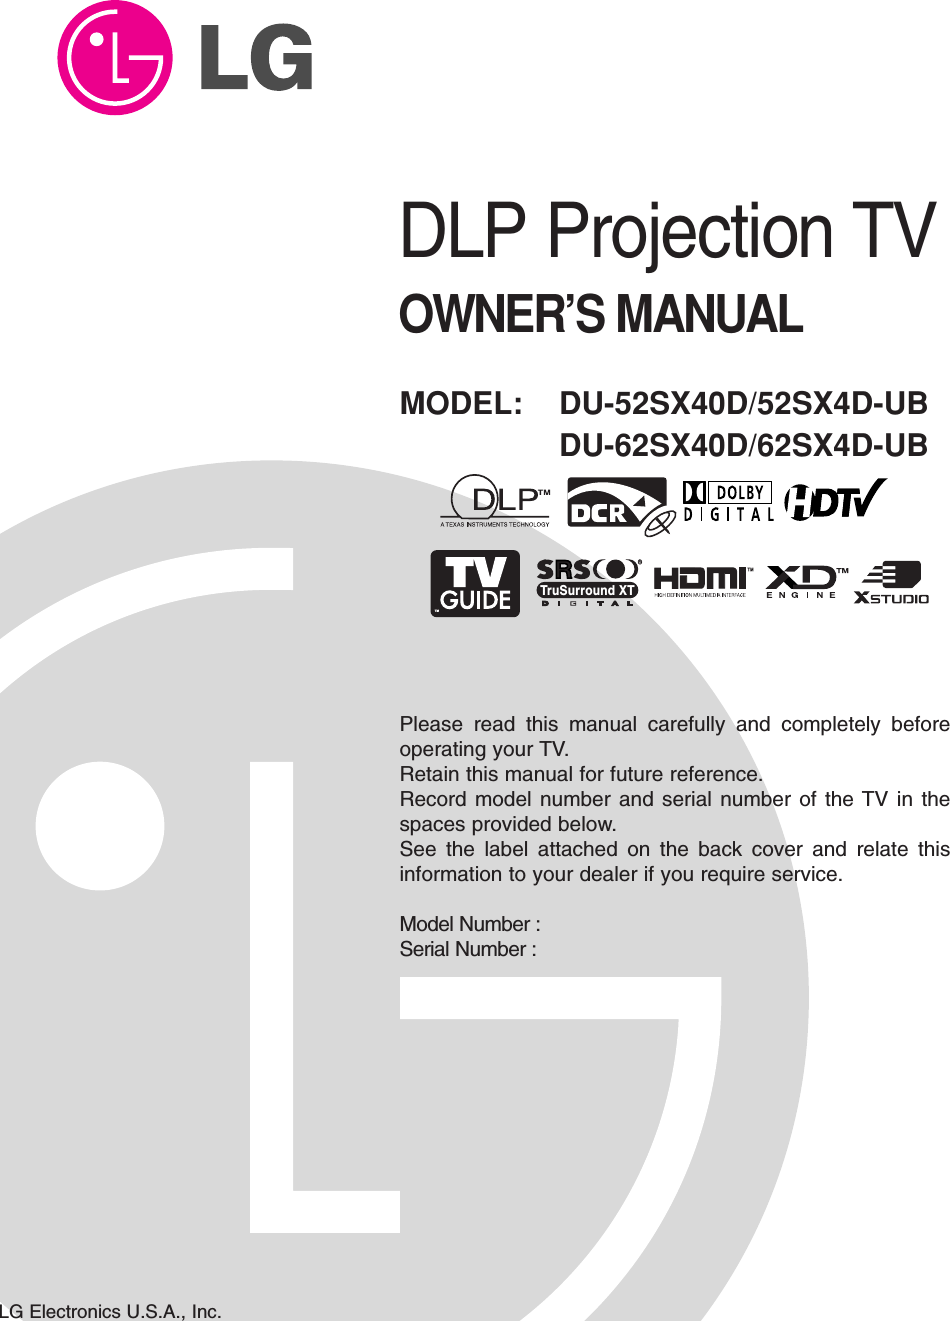 DLP Projection TVOWNER’S MANUALMODEL: DU-52SX40D/52SX4D-UBDU-62SX40D/62SX4D-UBLG Electronics U.S.A., Inc.TMRTruSurround XTPlease read this manual carefully and completely beforeoperating your TV. Retain this manual for future reference.Record model number and serial number of the TV in thespaces provided below. See the label attached on the back cover and relate thisinformation to your dealer if you require service.Model Number : Serial Number : 